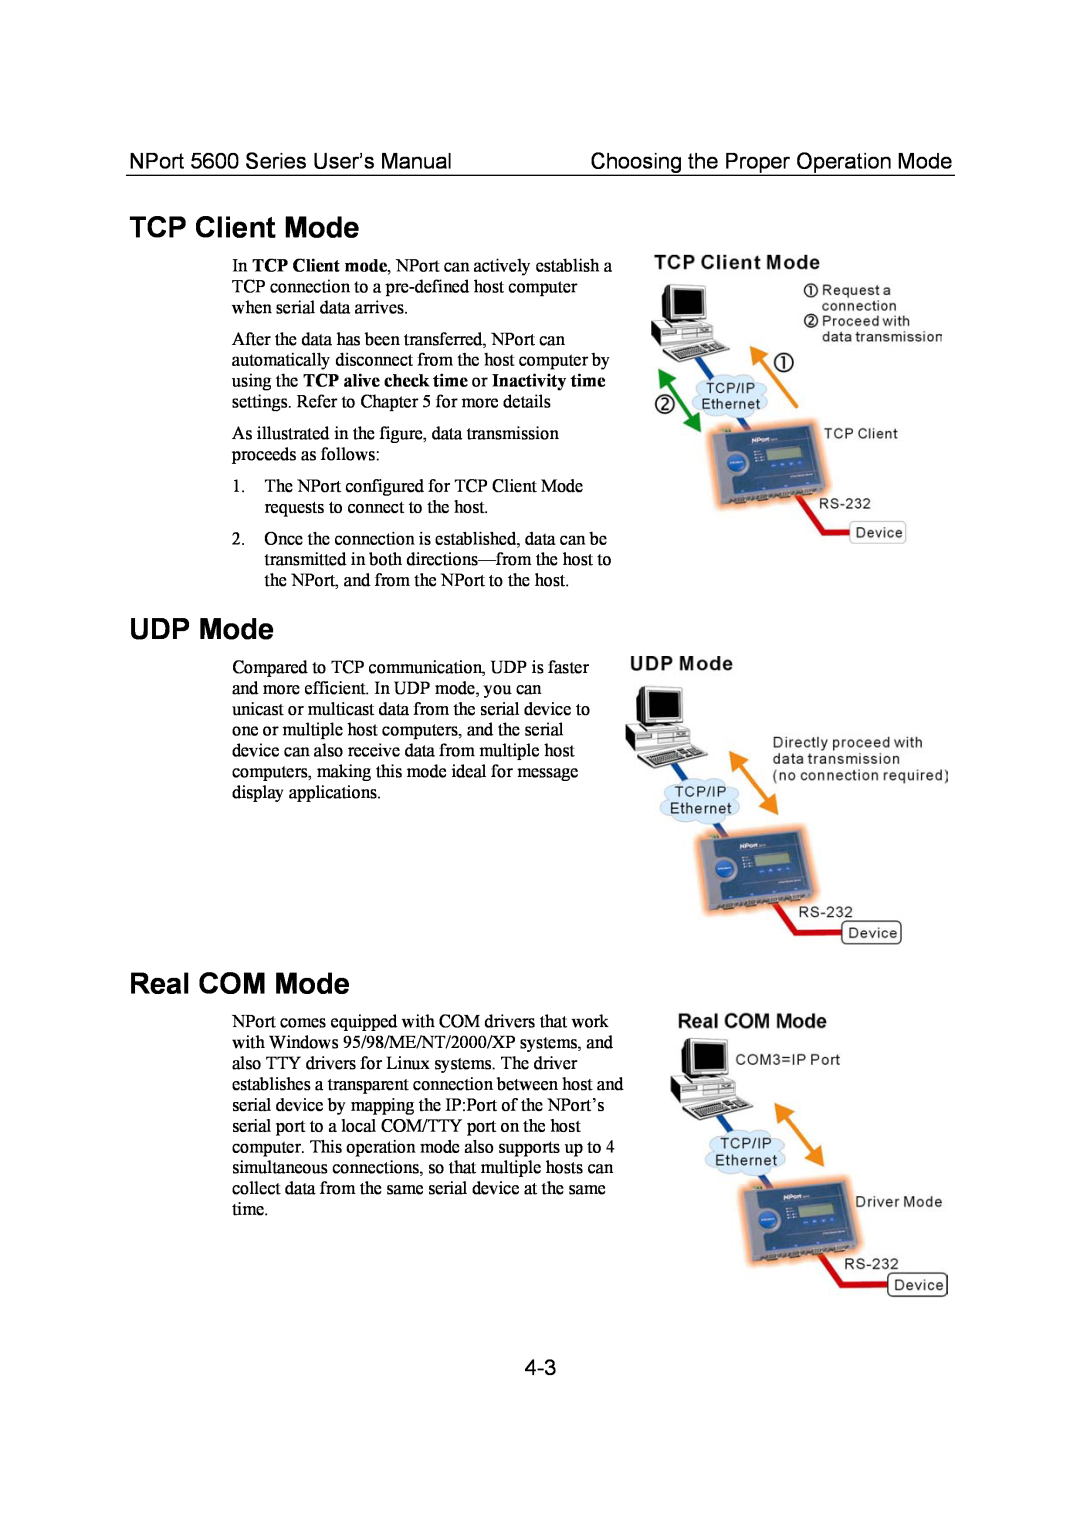 Moxa Technologies user manual TCP Client Mode, UDP Mode, Real COM Mode, NPort 5600 Series User’s Manual 